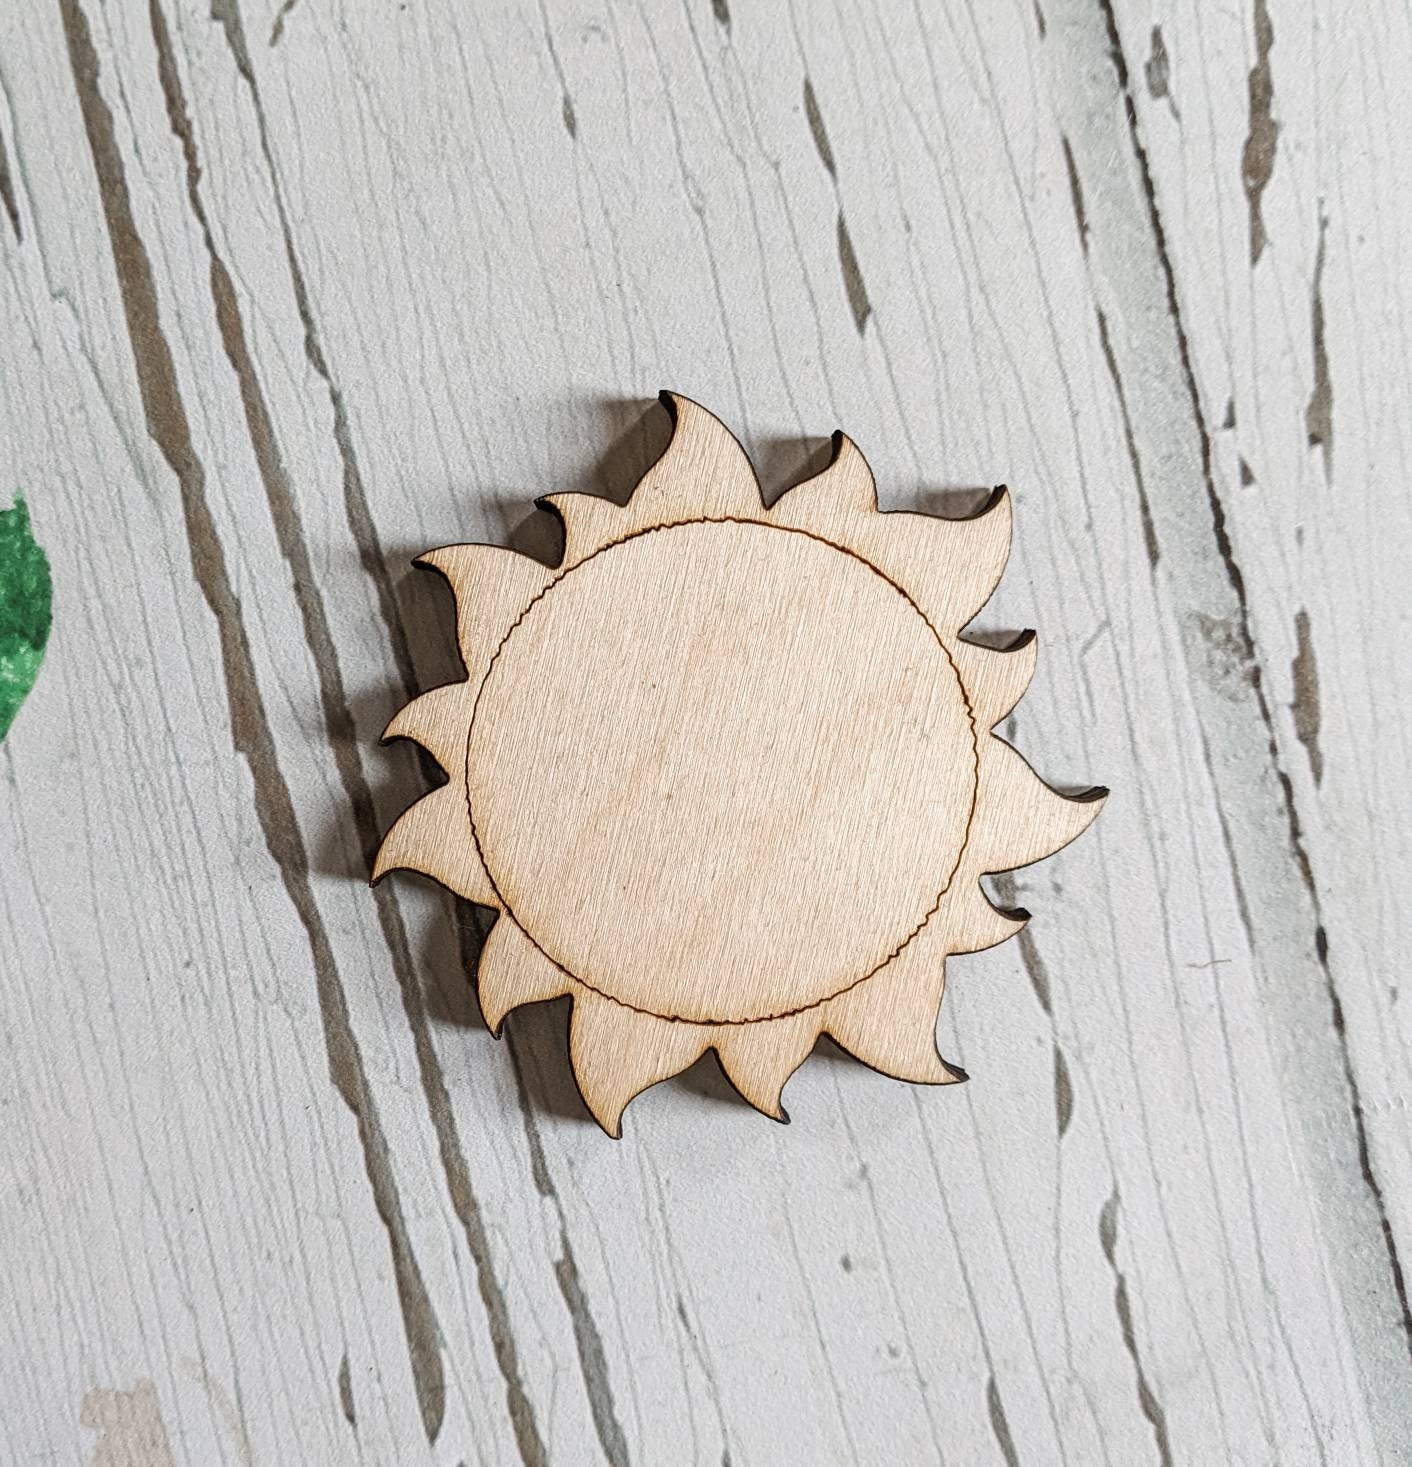 SUN/SUNFLOWER SHAPE Unfinished 1/4 Wood - 12 inch - Wooden Blanks